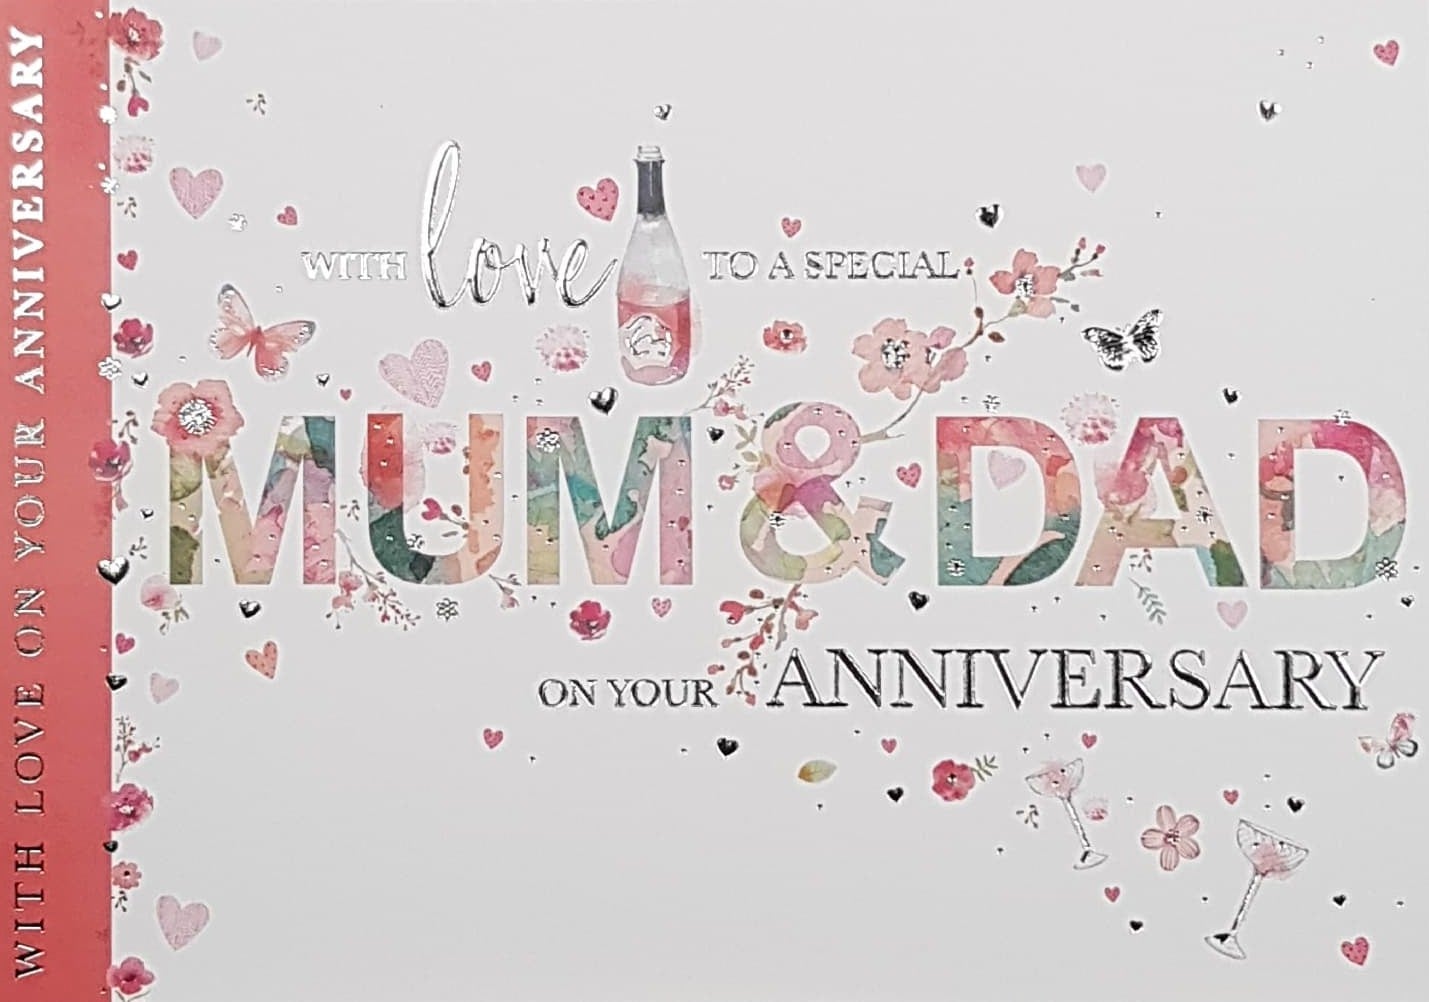 Anniversary Card - Mum & Dad / A Colourful Artistic Font With Pink Flowers & A Bottle